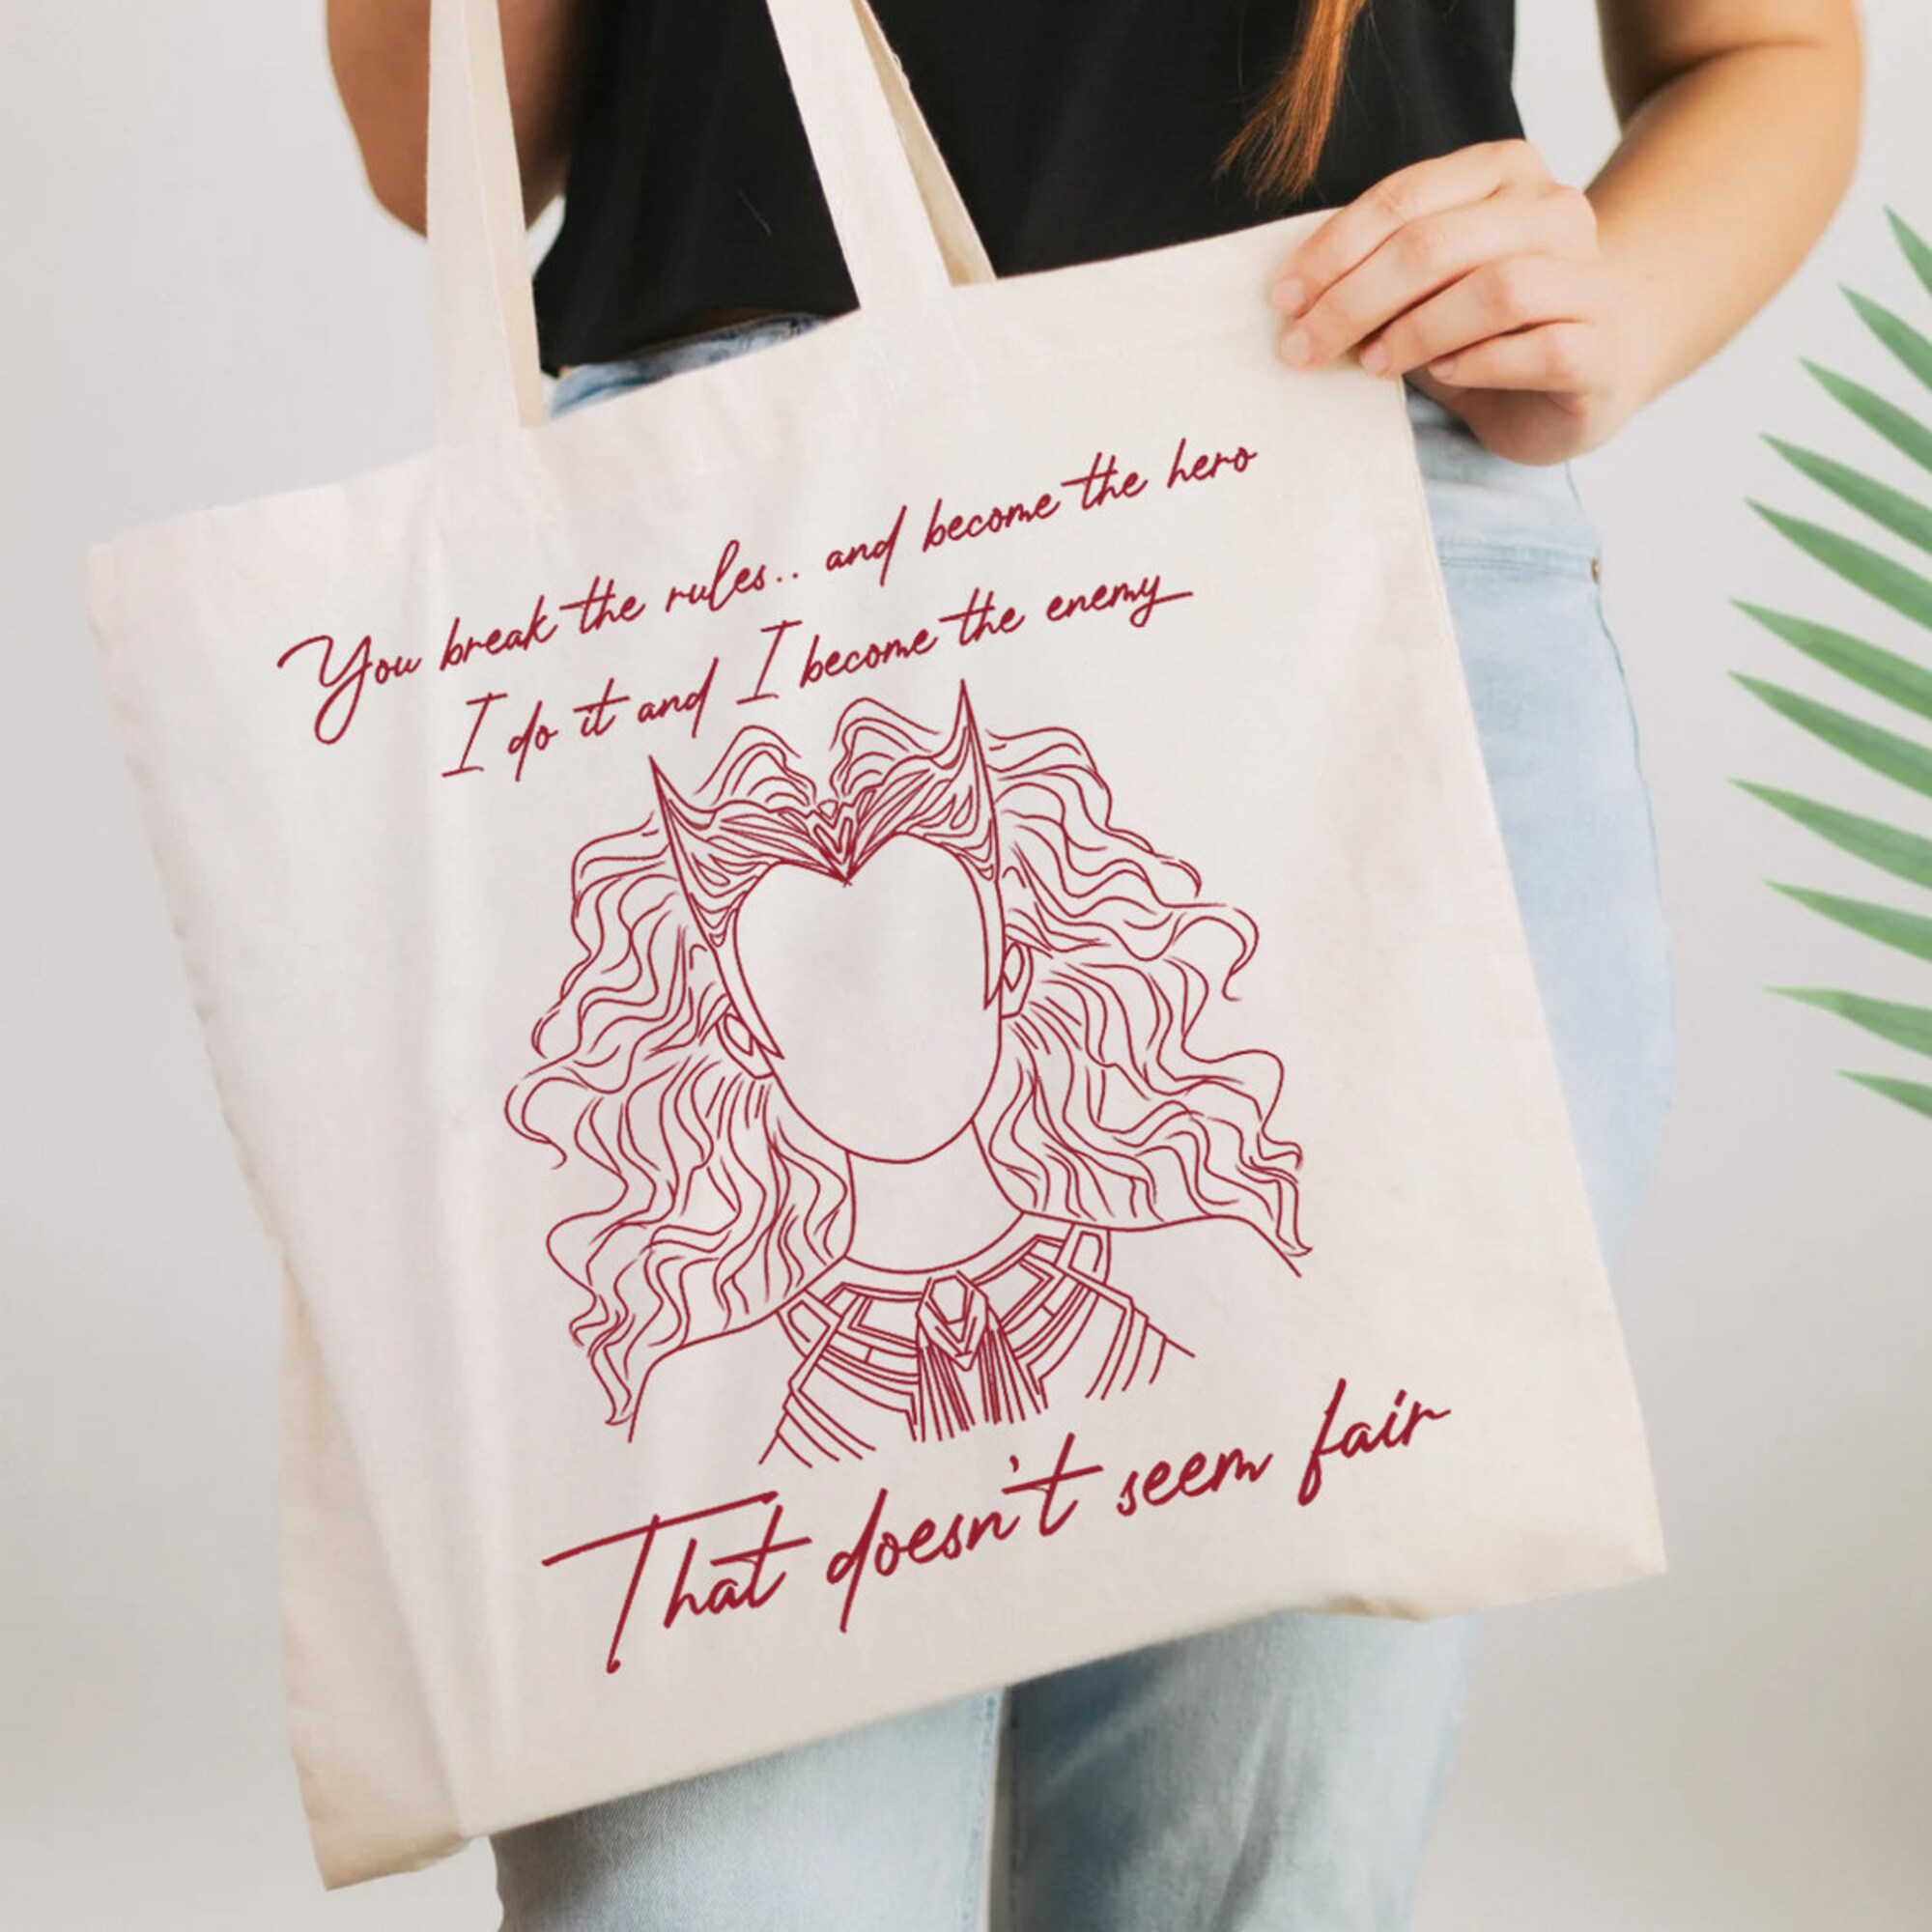 Wanda Quote Canvas Tote Bag - You Break The Rules And Become The Hero